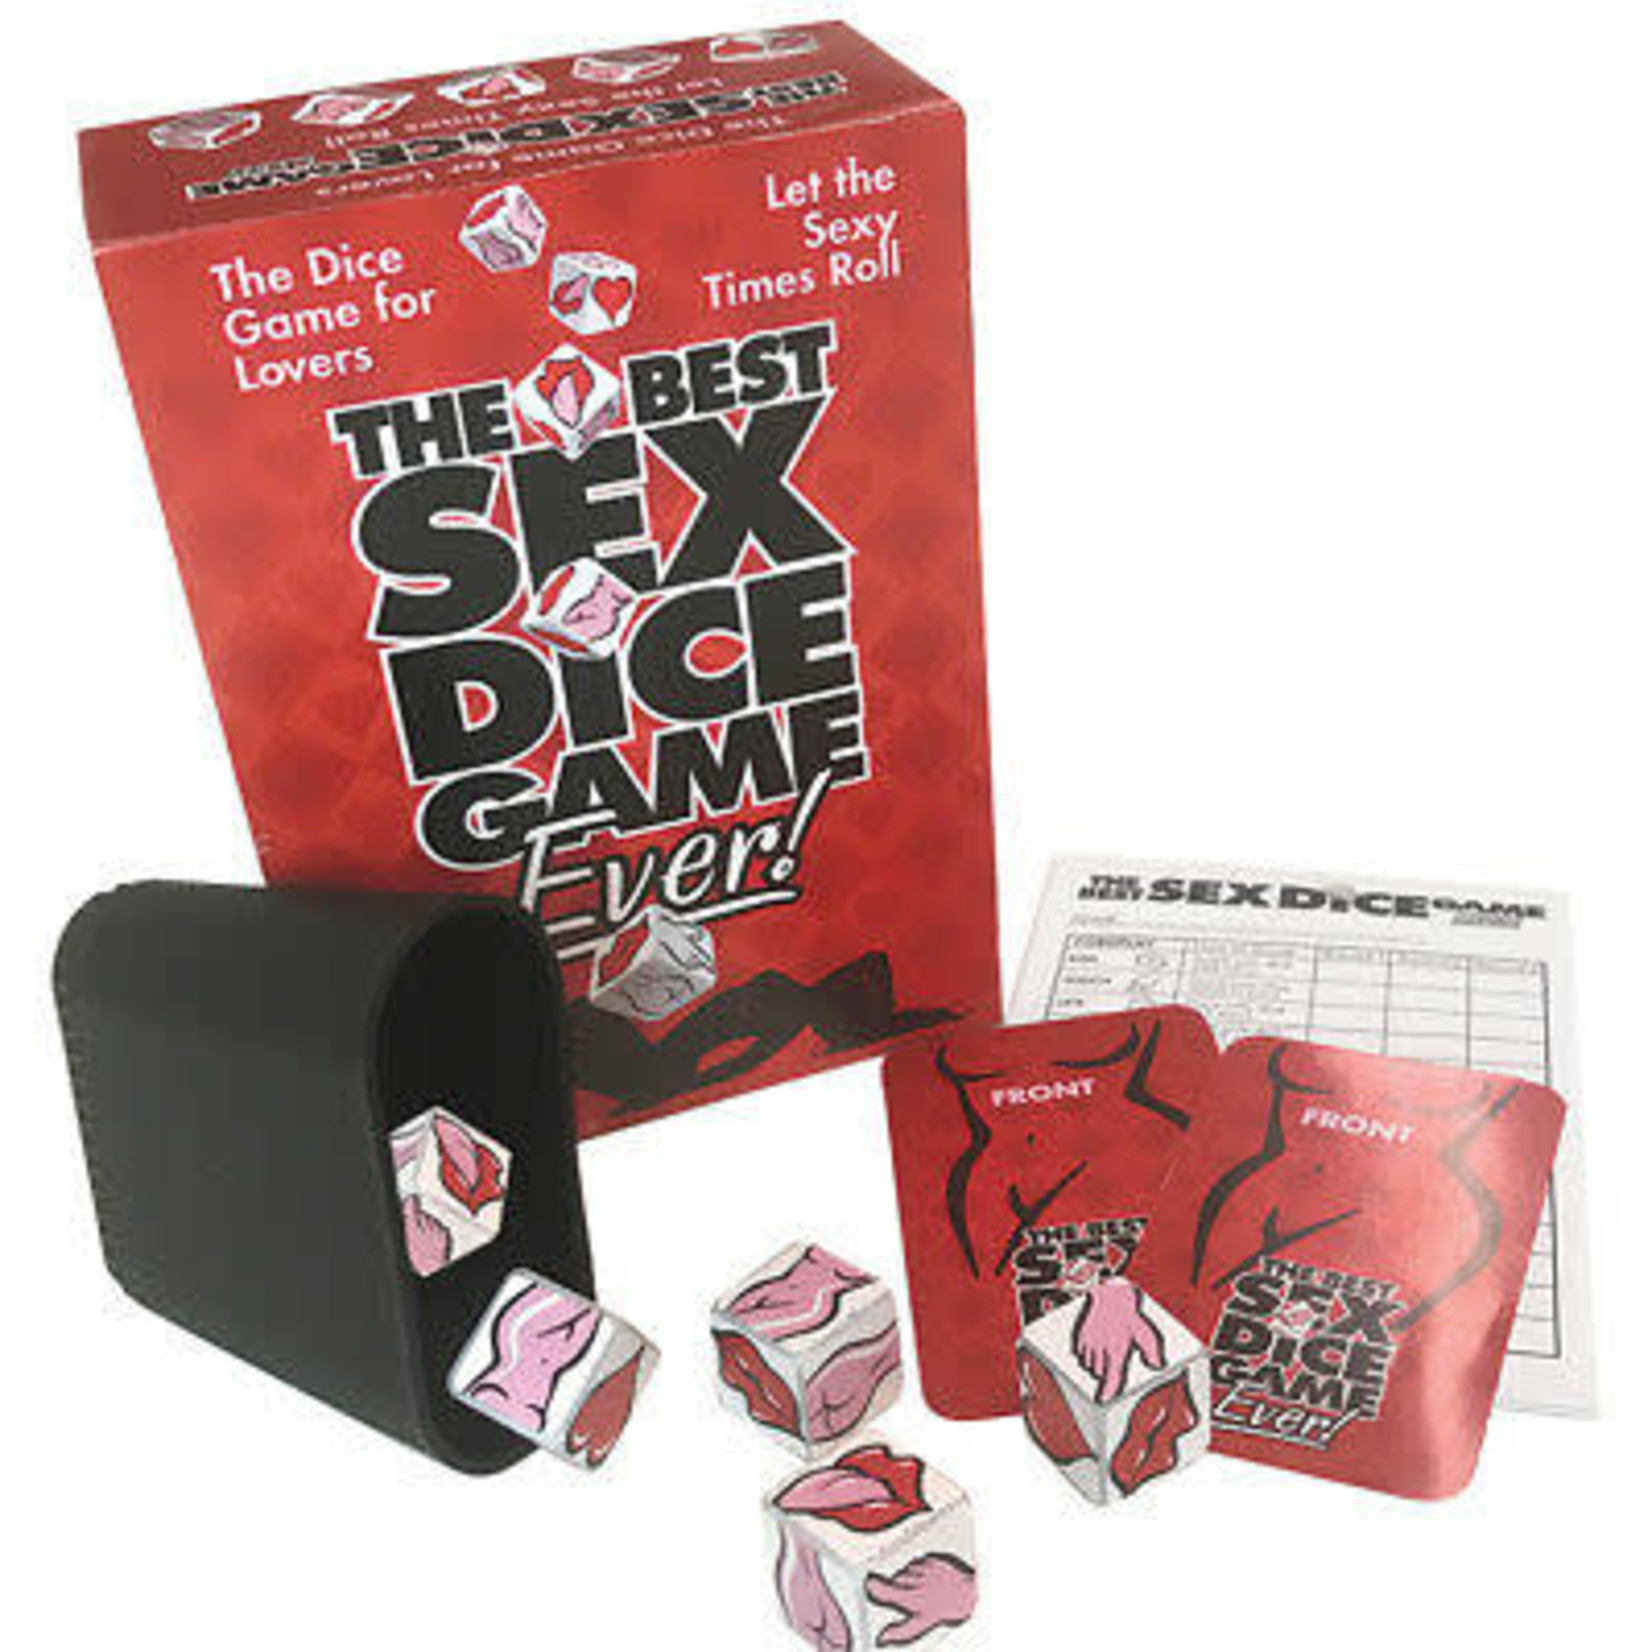 THE BEST SEX DICE GAME EVER!